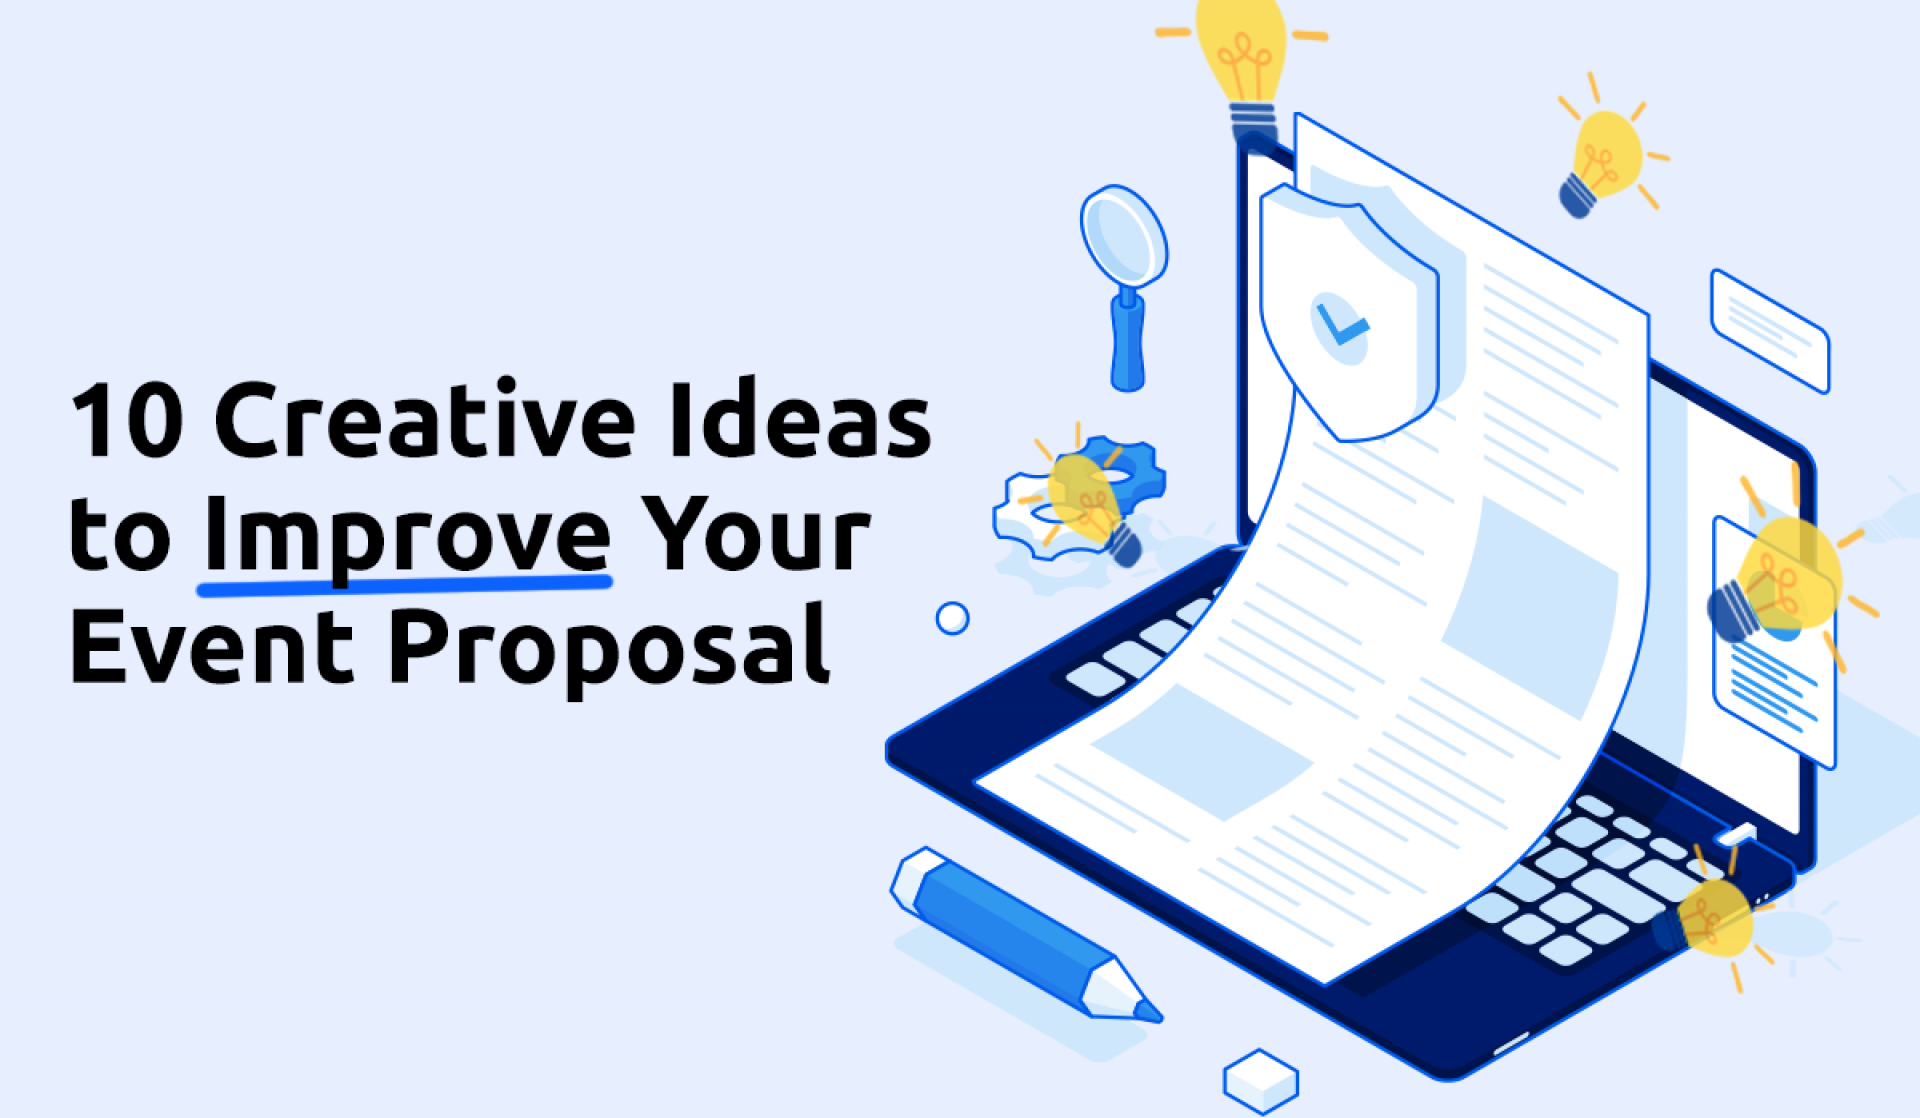 10 Creative Ideas to Improve Your Event Proposal